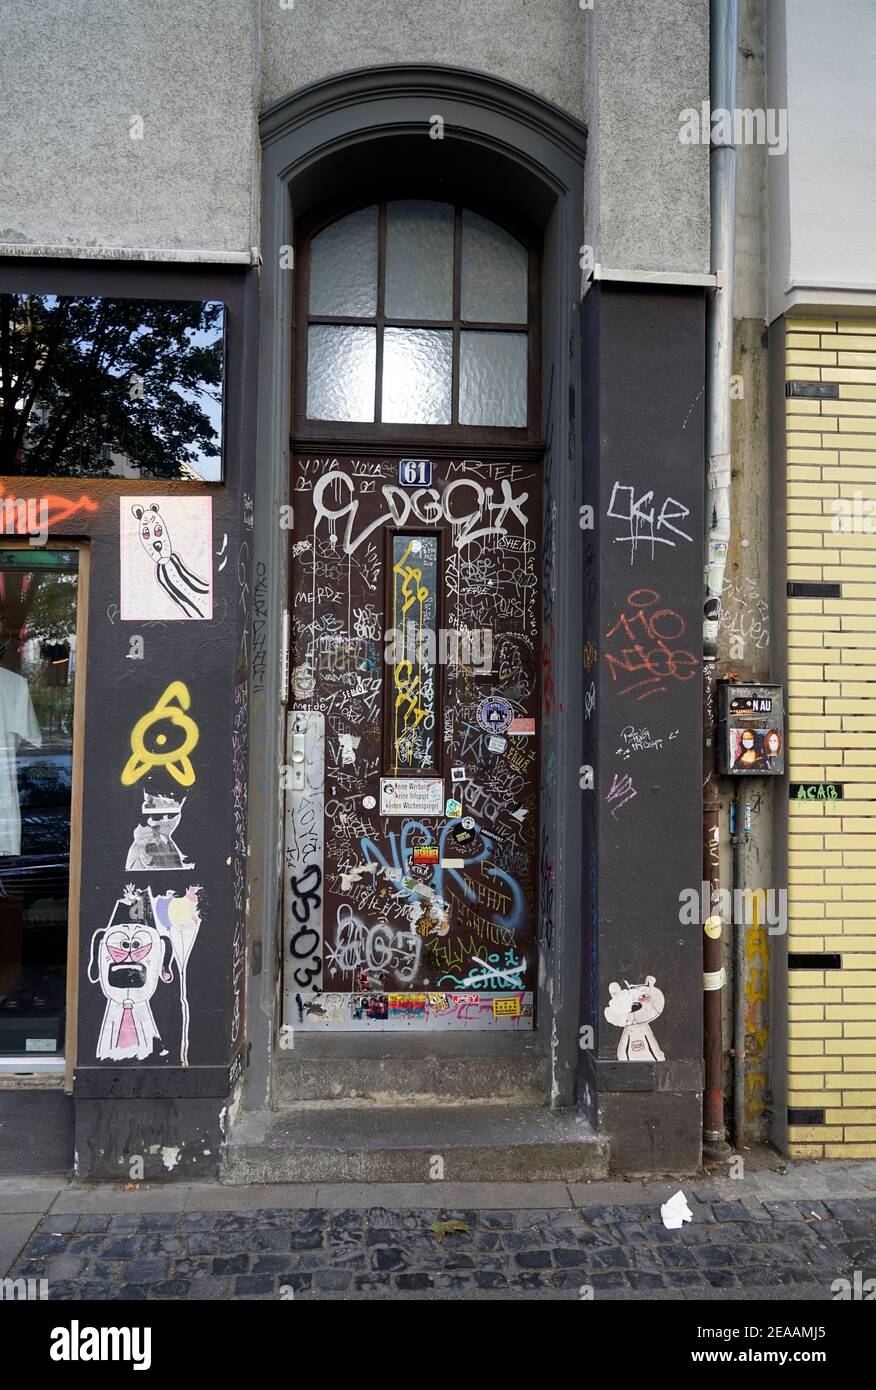 Germany, North Rhine-Westphalia, Cologne, old residential building, front door, defaced with writings, signs, graffiti Stock Photo